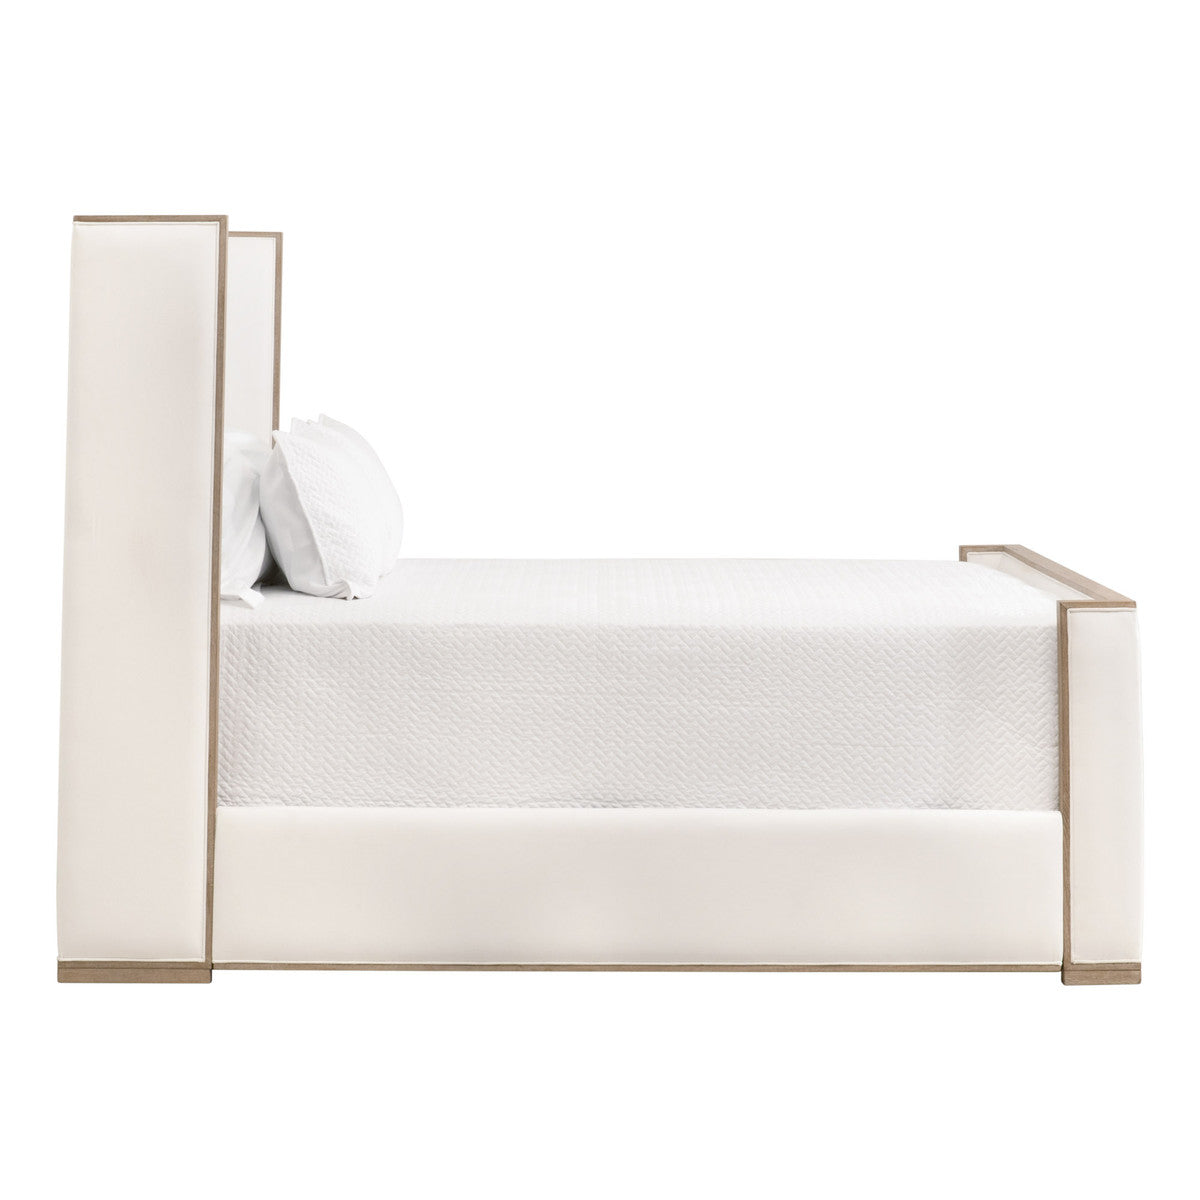 Tailor Shelter Queen Bed in Livesmart Peyton-Pearl, Natural Gray Oak - 7130-1.LPPRL/NG